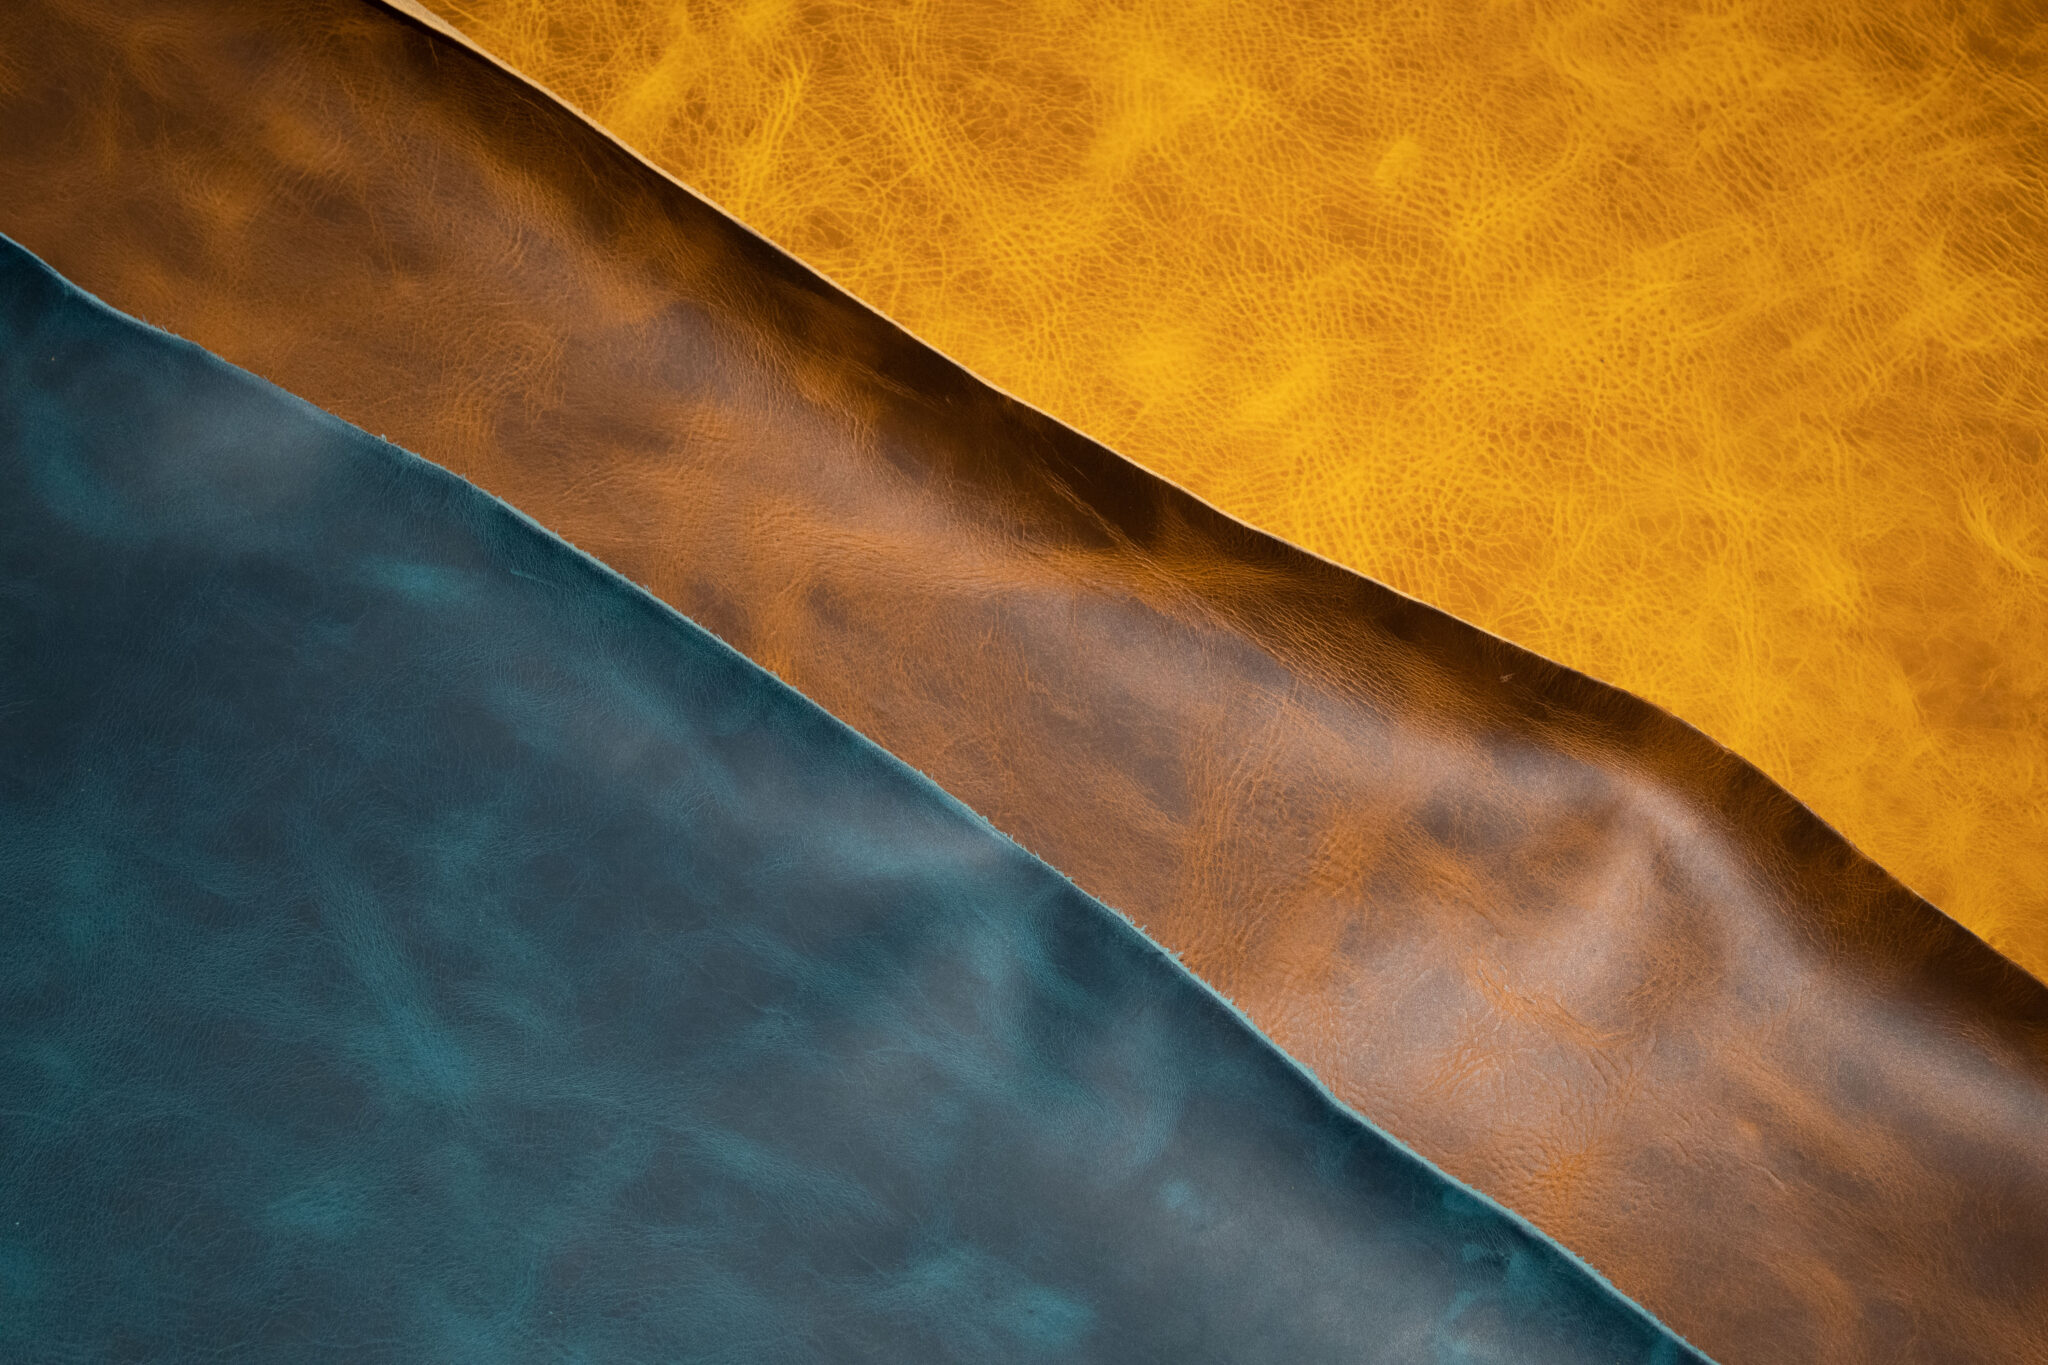 Italian vegetable tanned leather hides